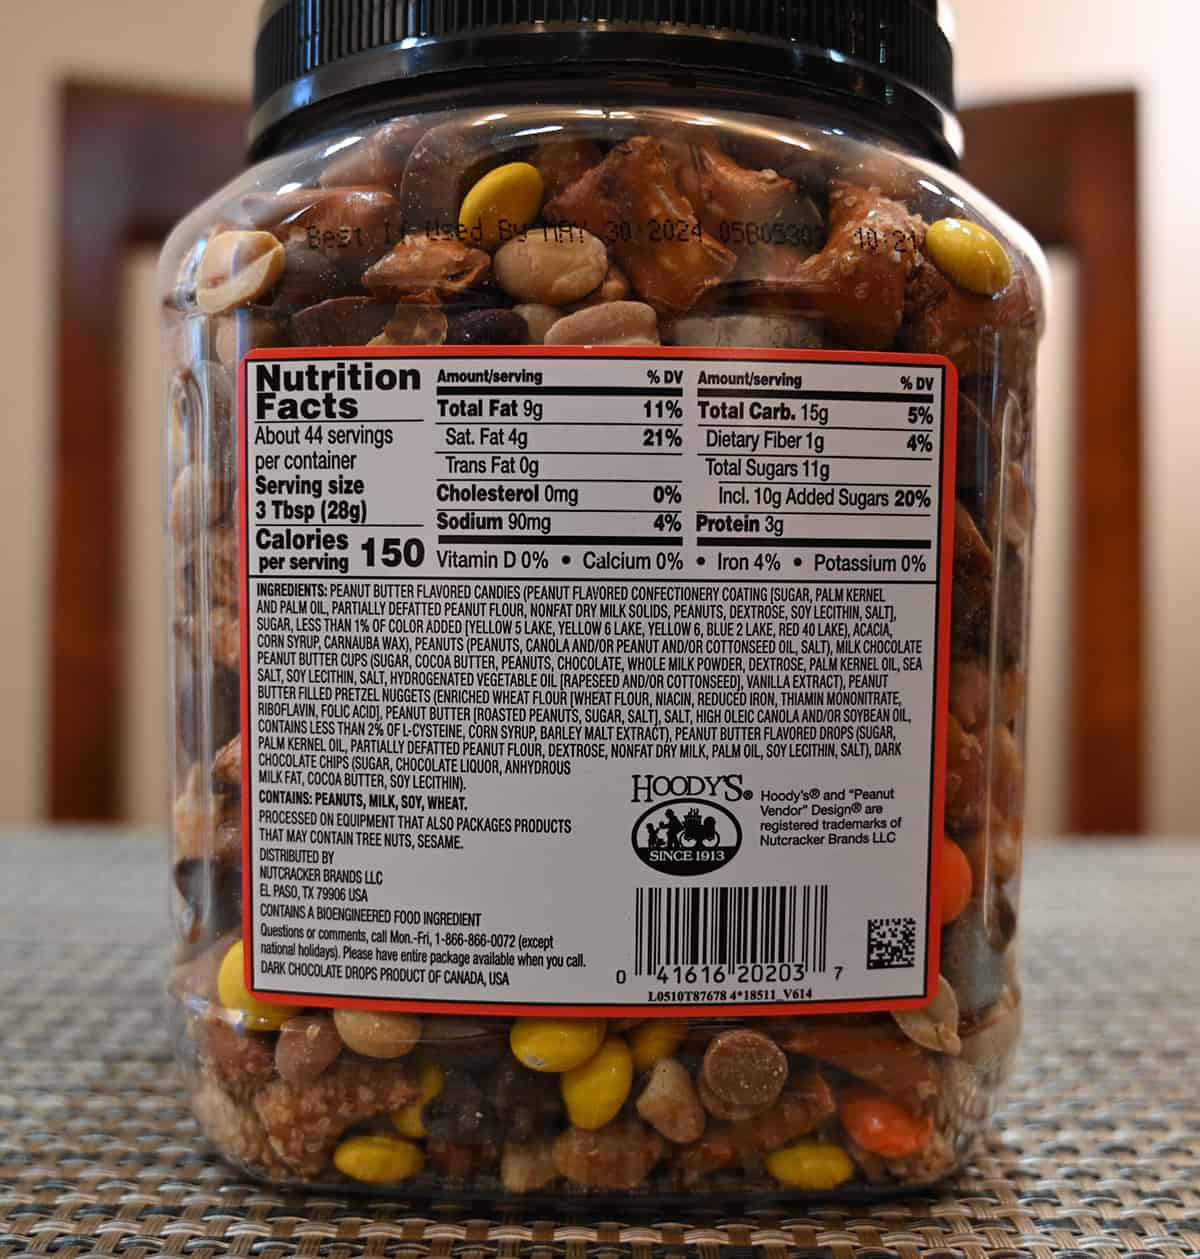 Closeup image of the back label on the mix showing ingredients, where the mix is made and nutrition facts.